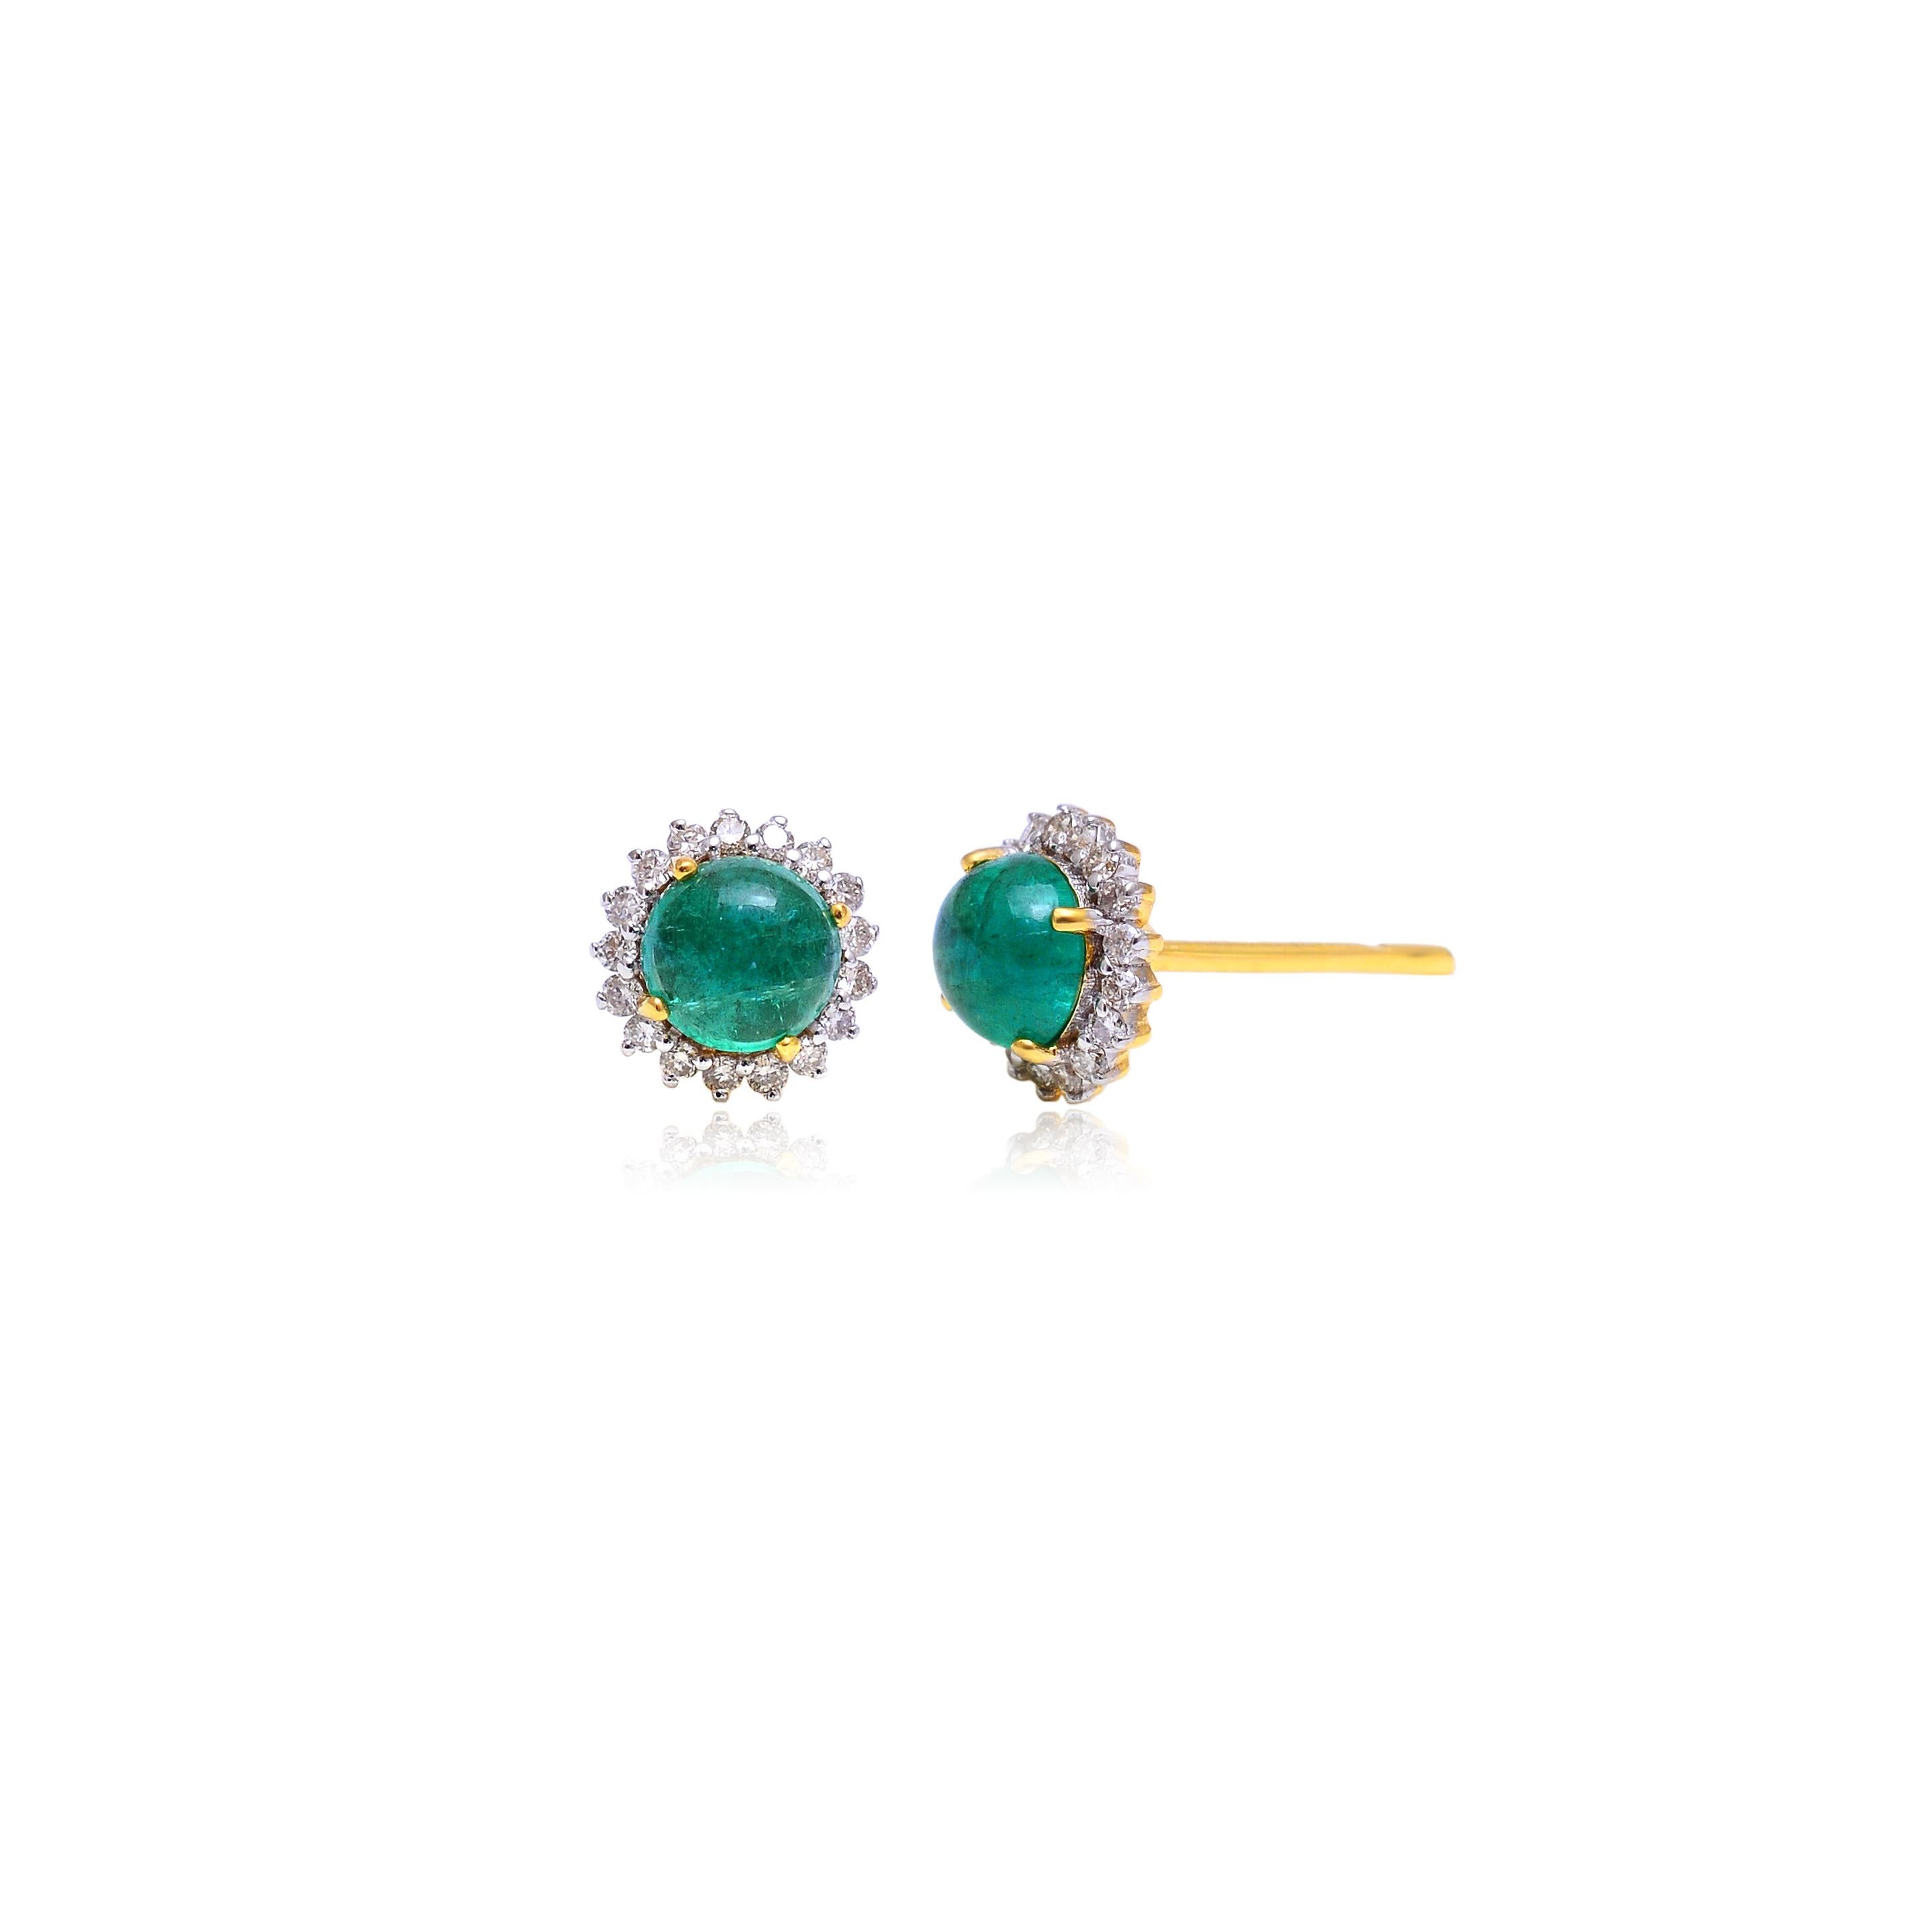 These earrings are made with emerald gemstones and diamond. They are set in 14K gold. Shine all day long in this delicate pair of stud earrings. Perfect for gifting, they twinkle with timeless elegance. Easy to mix and match with other jewellery